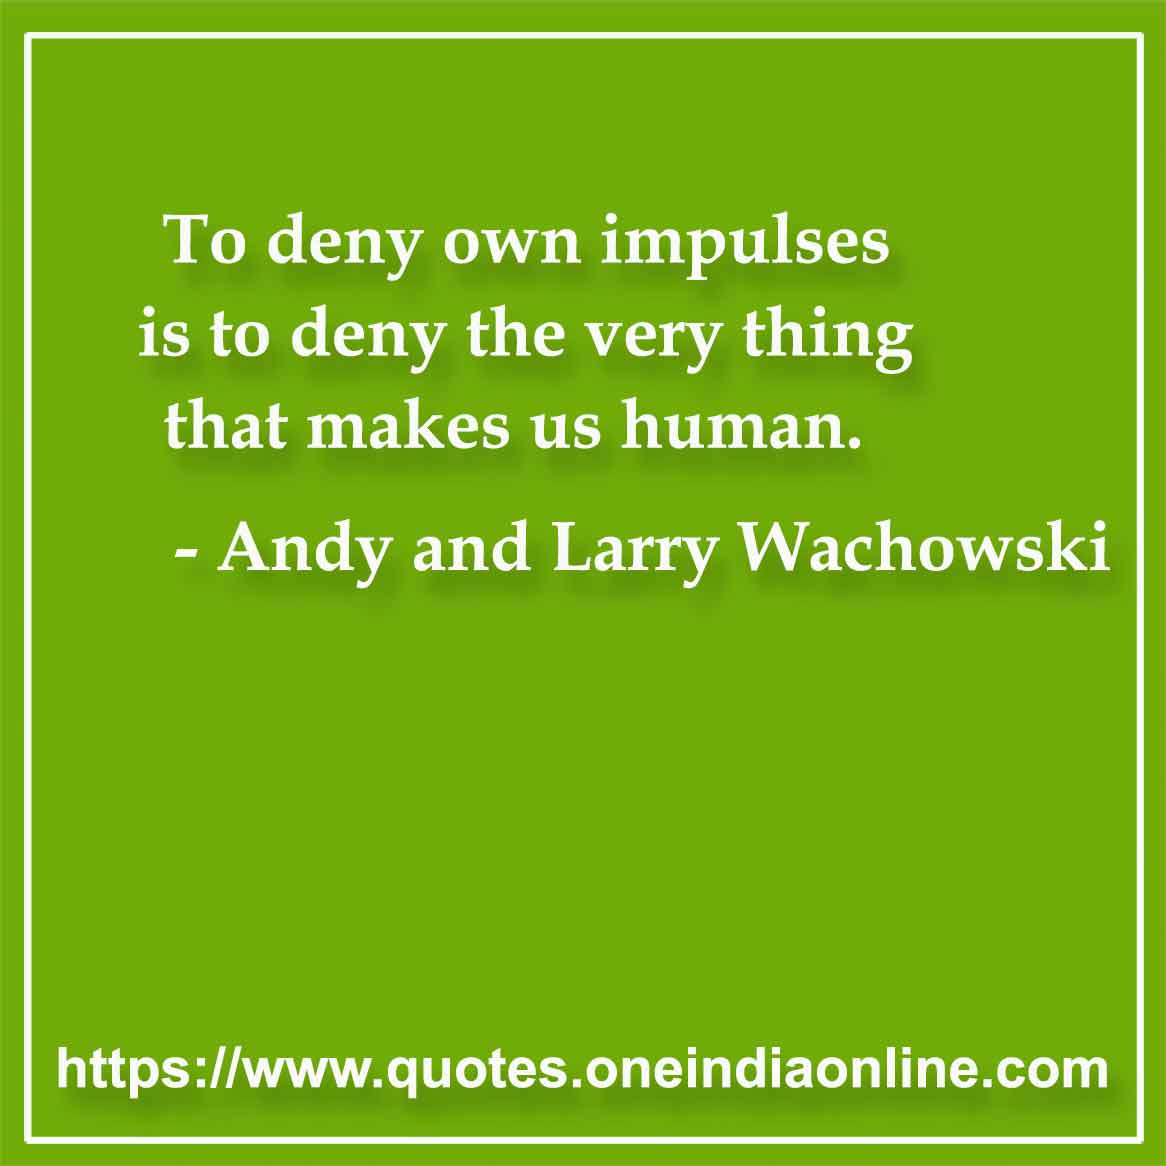 To deny own impulses is to deny the very thing that makes us human.

- Mankind Quotes by Andy and Larry Wachowski